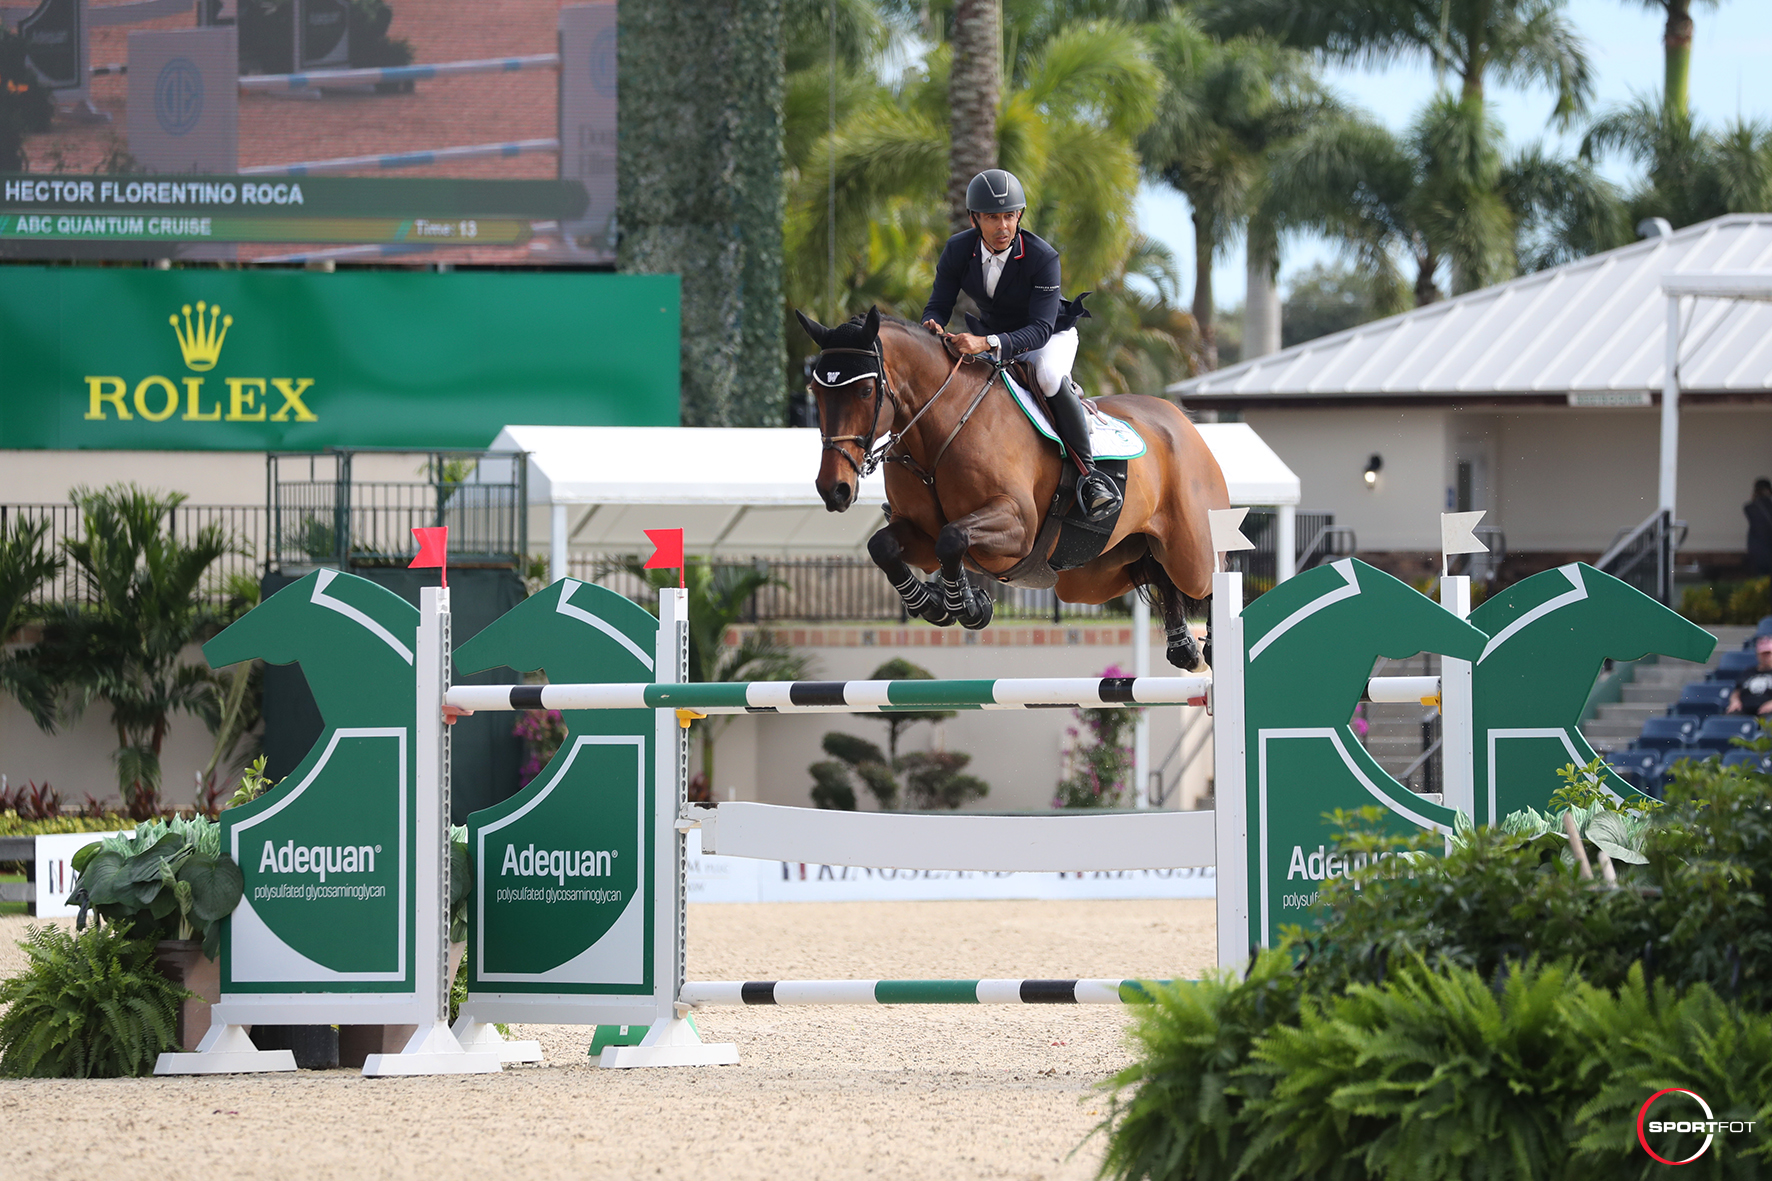 Hector Florentino and ABC Quantum Cruise Capture First Adequan® WEF Challenge Cup at 2022 Winter Equestrian Festival